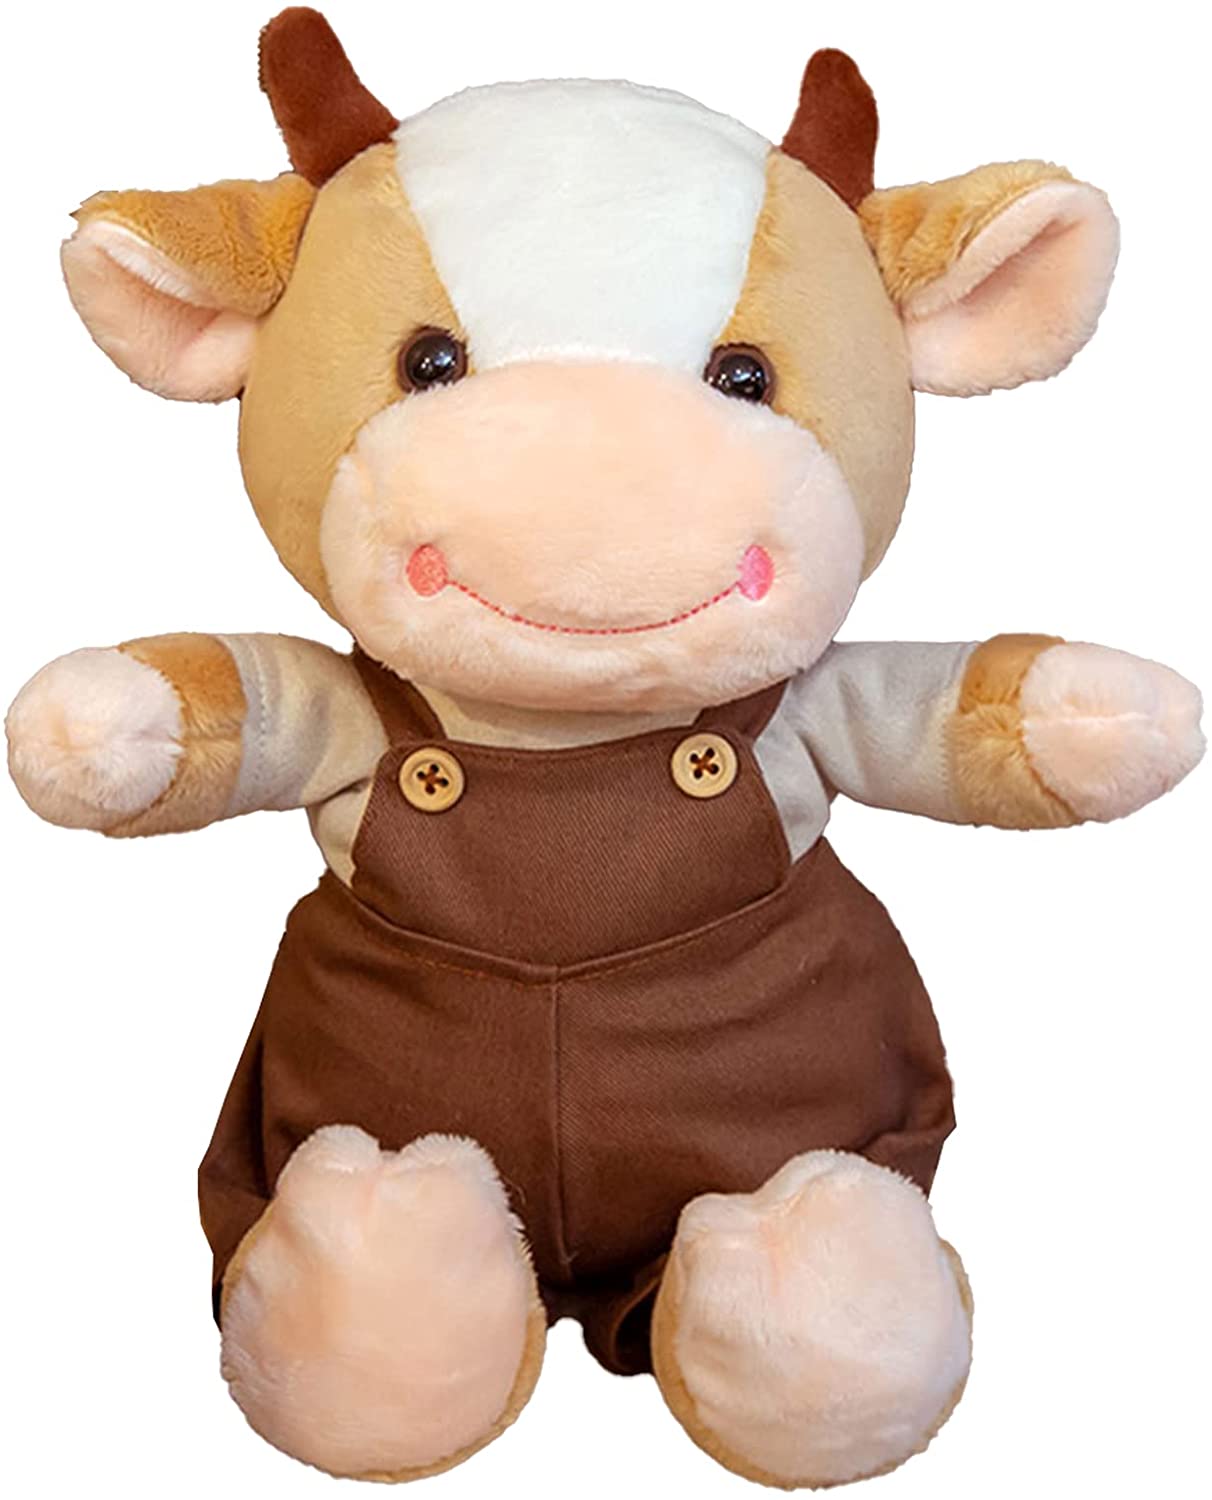 RELIGES 9 Cute Cow Stuffed Animals Soft Cuddly Cow Plush Stuffed Animal  Birthday Gifts for Boys and…See more RELIGES 9 Cute Cow Stuffed Animals  Soft